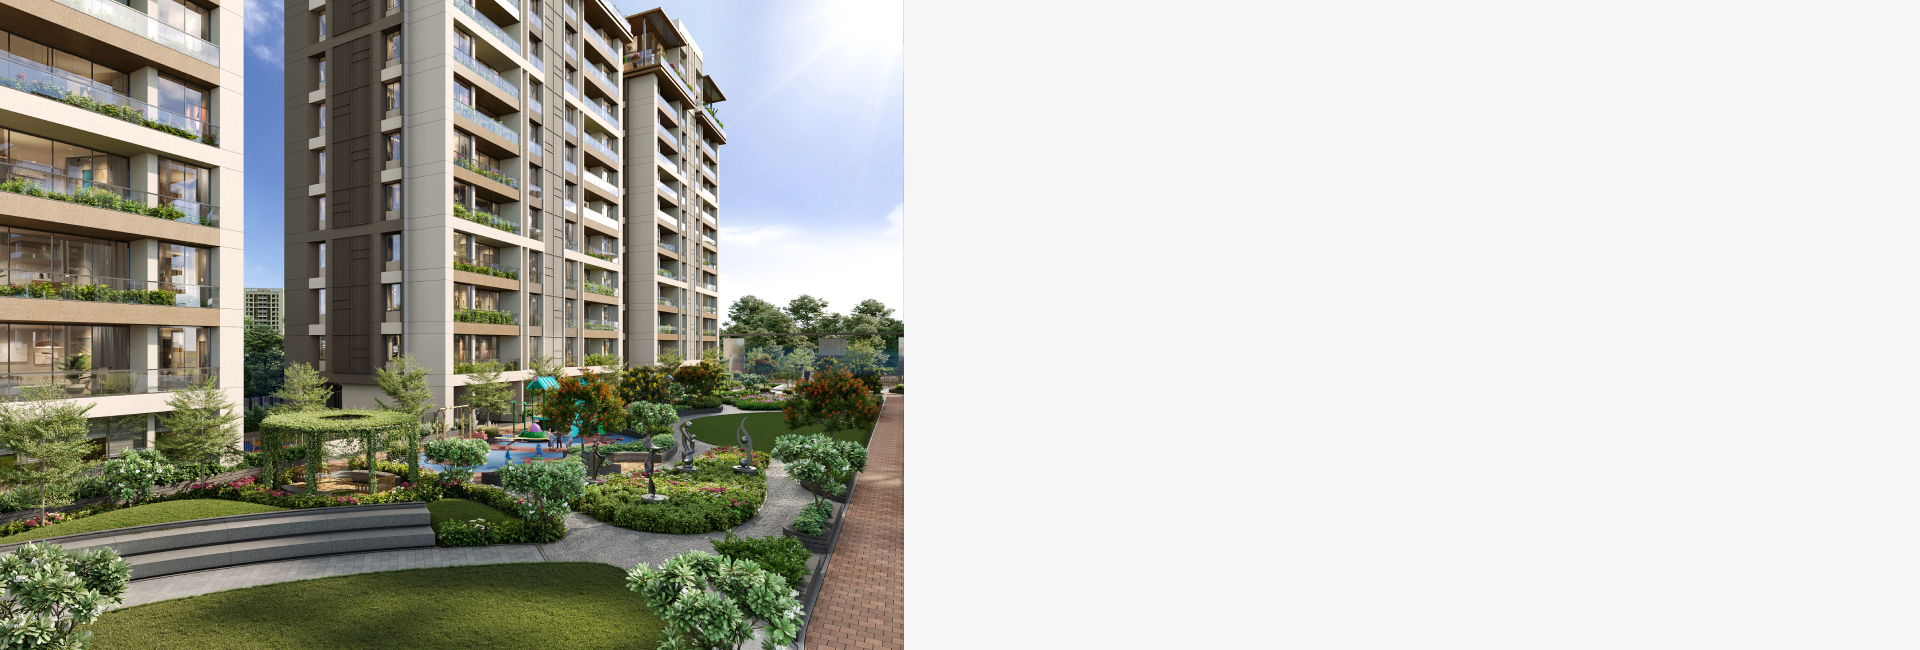 3 BHK and 4 BHK Flats in Surat